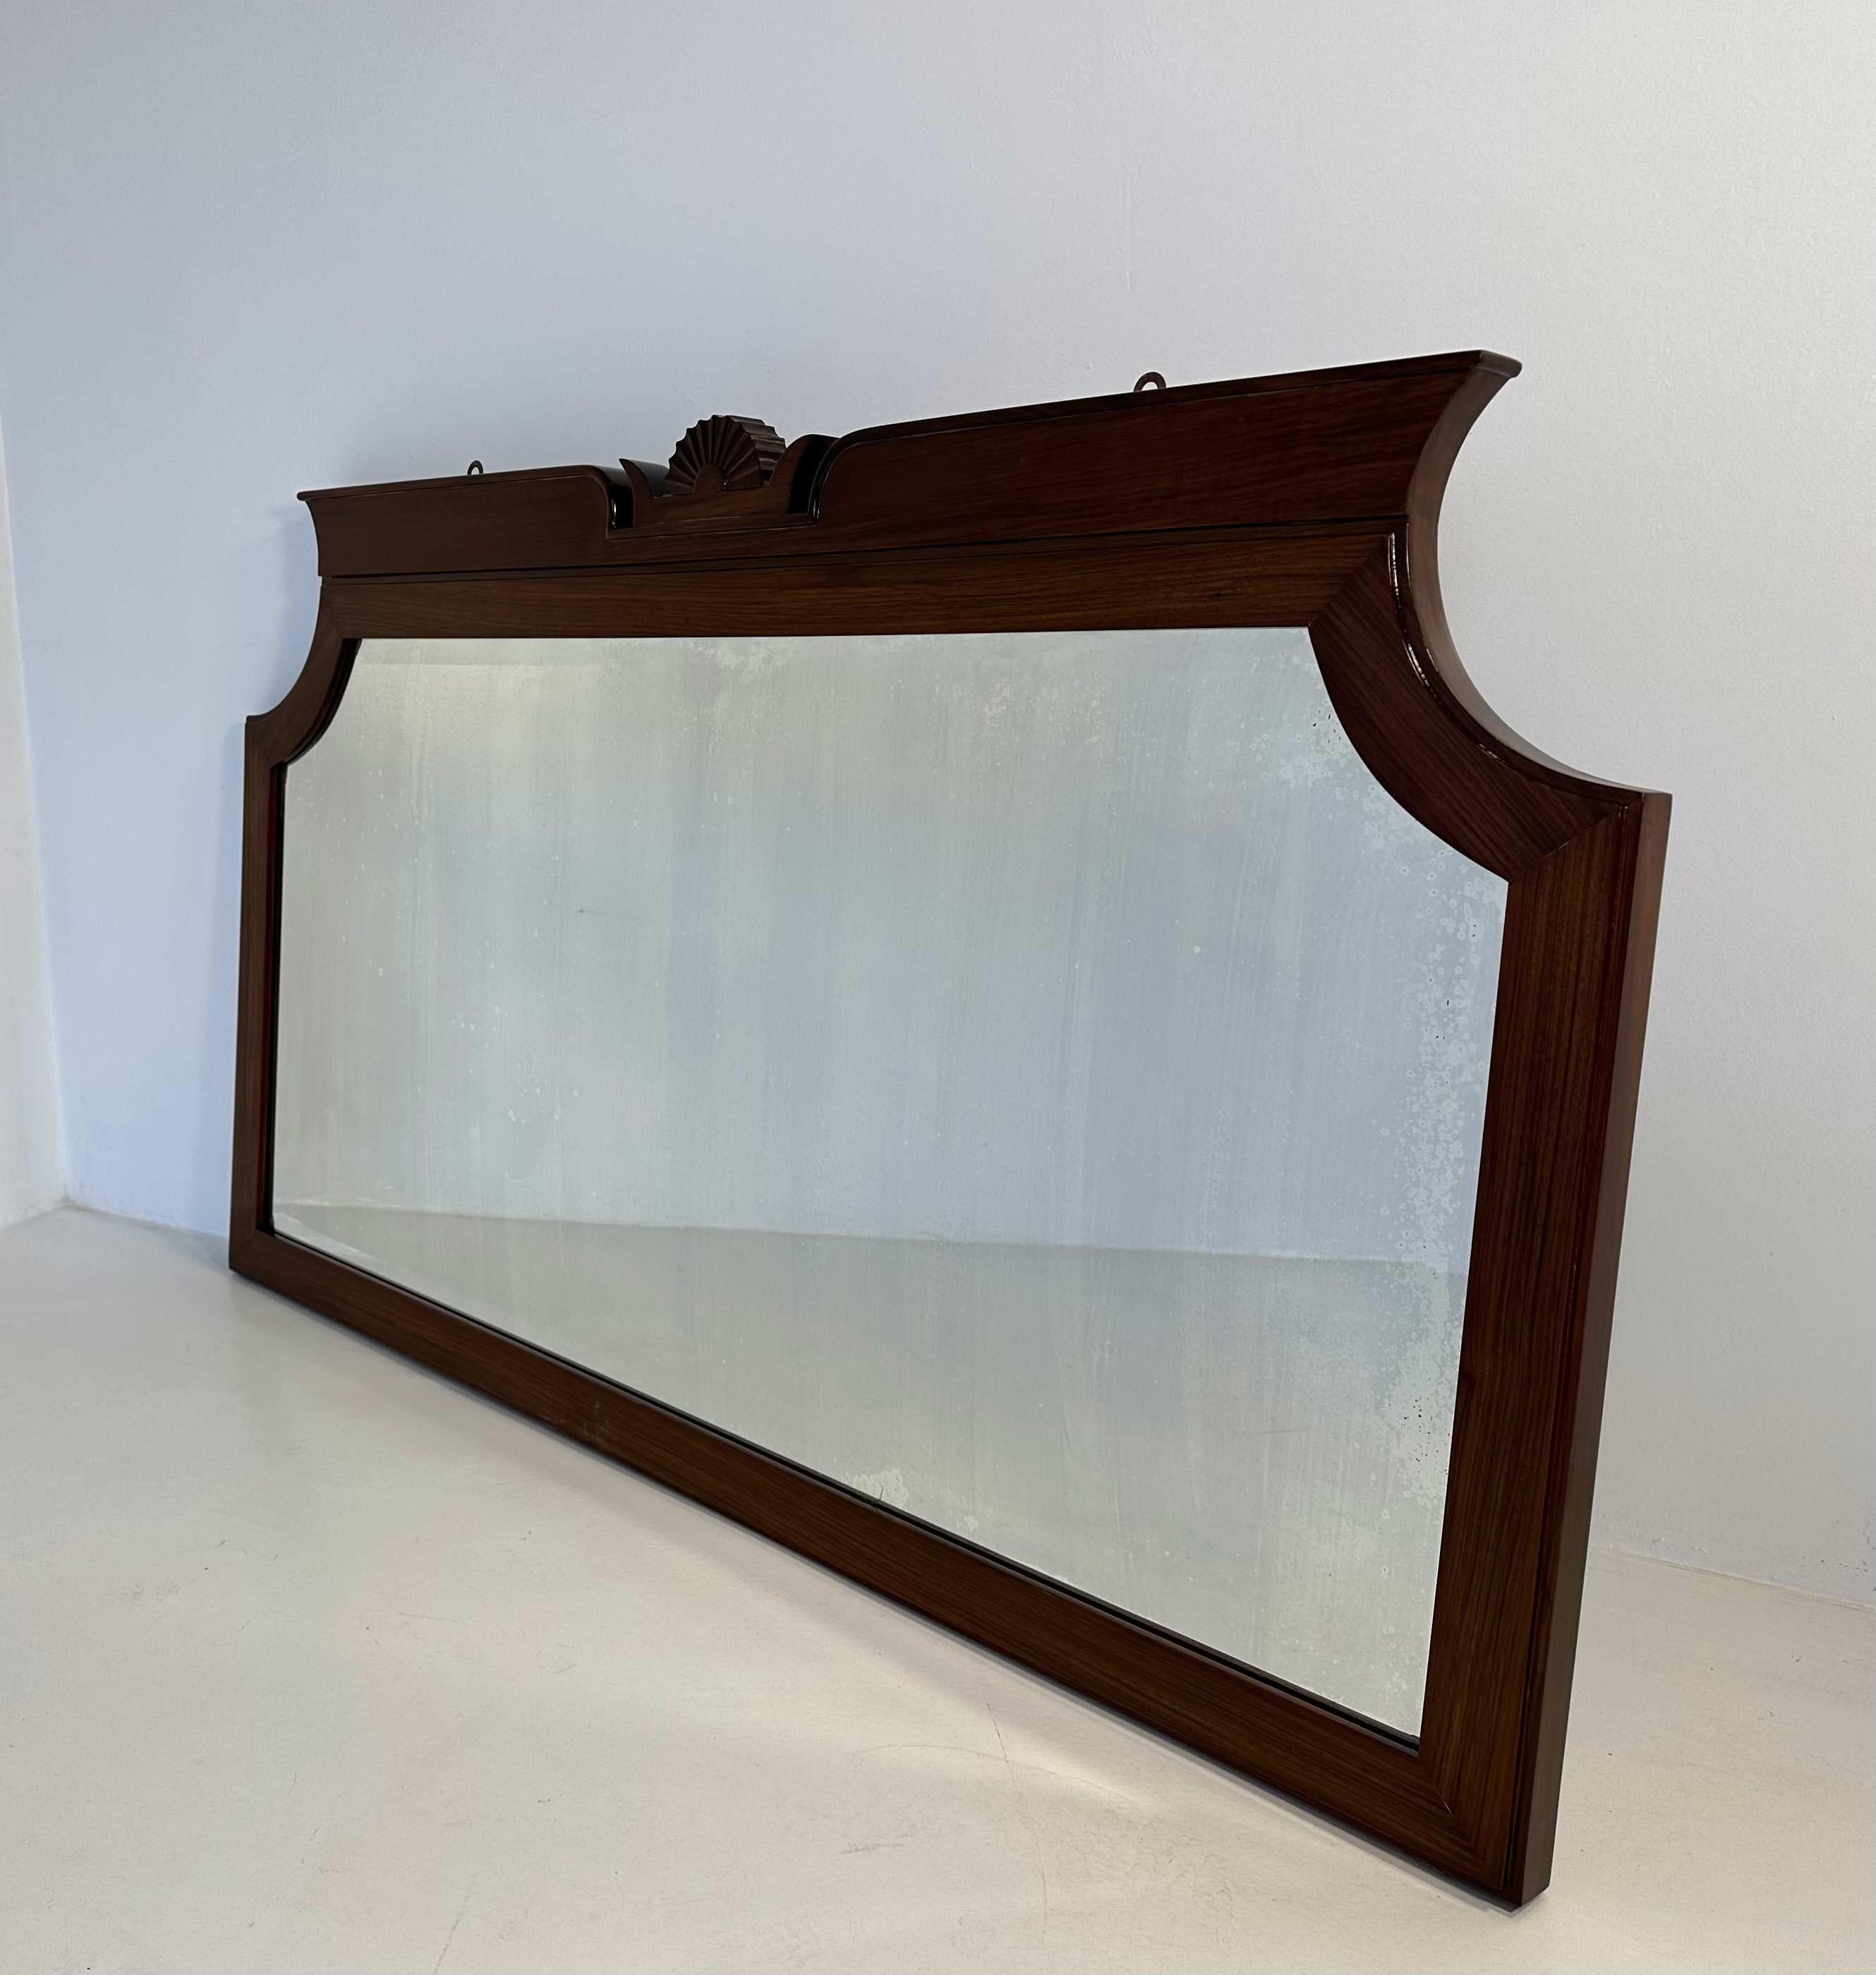 This mirror was produced in Italy, in Cantù (small village in the north of Italy, next to Milan), by Paolo Lietti & Figli and designed by Gio Ponti. 
This mirror in particular was manufactured by Luigi Brusotti in the 1927/1928. It has a label on